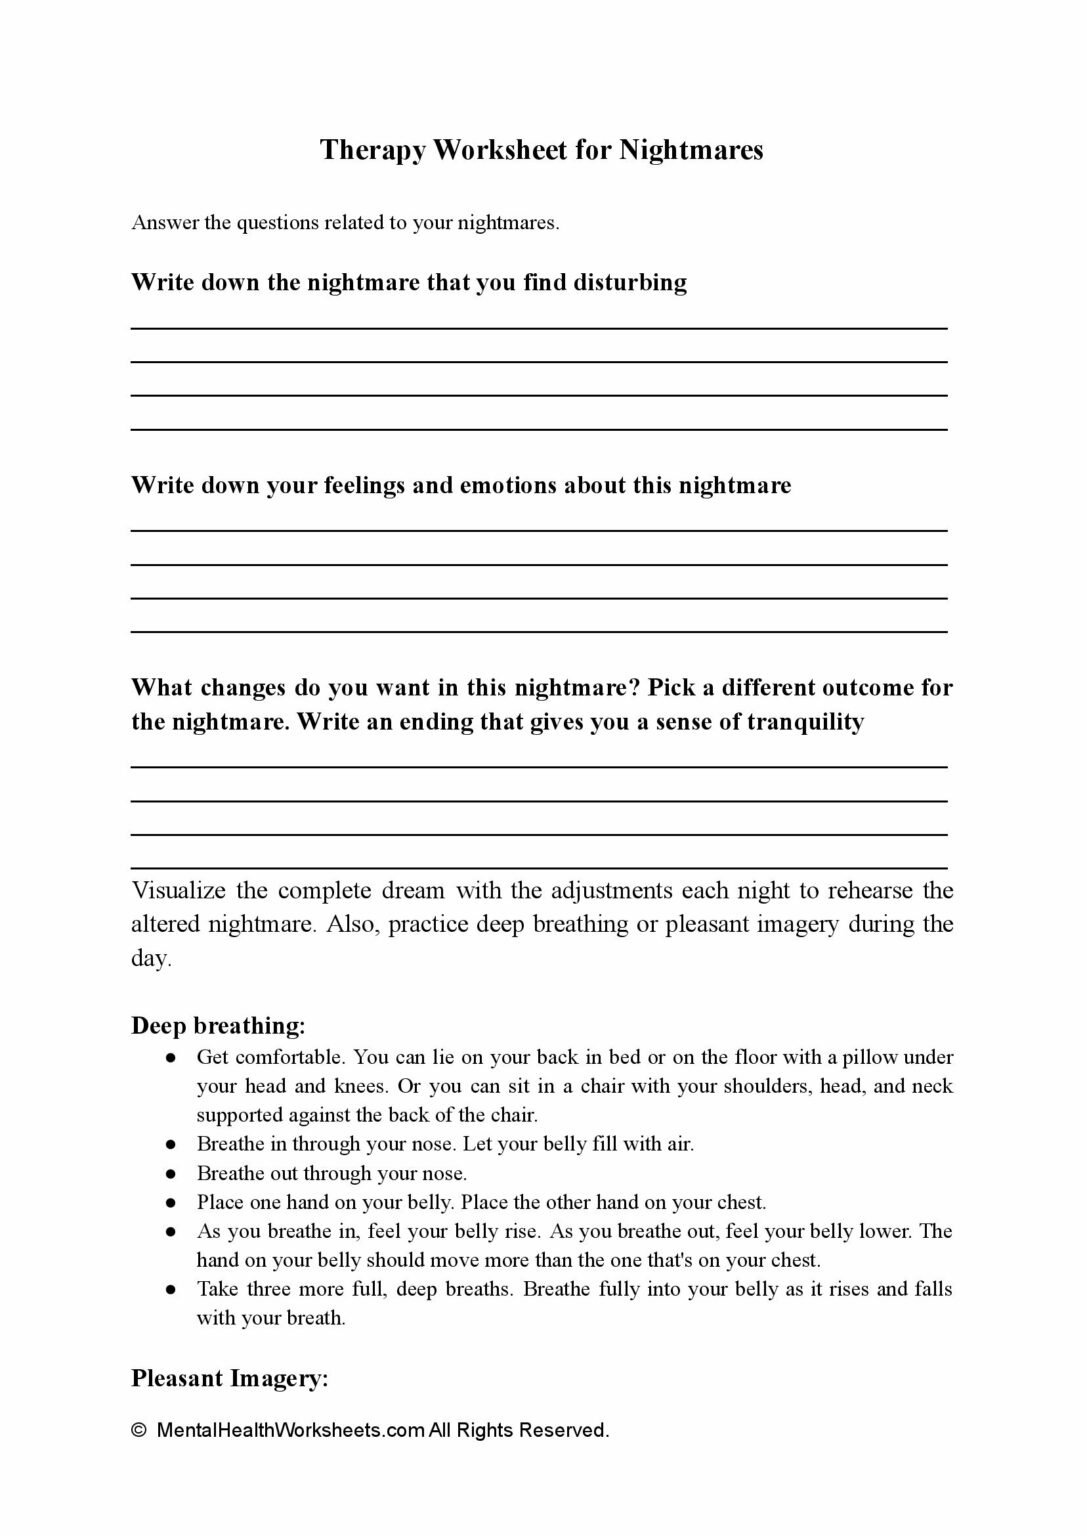 Therapy Worksheet For Nightmares Mental Health Worksheets